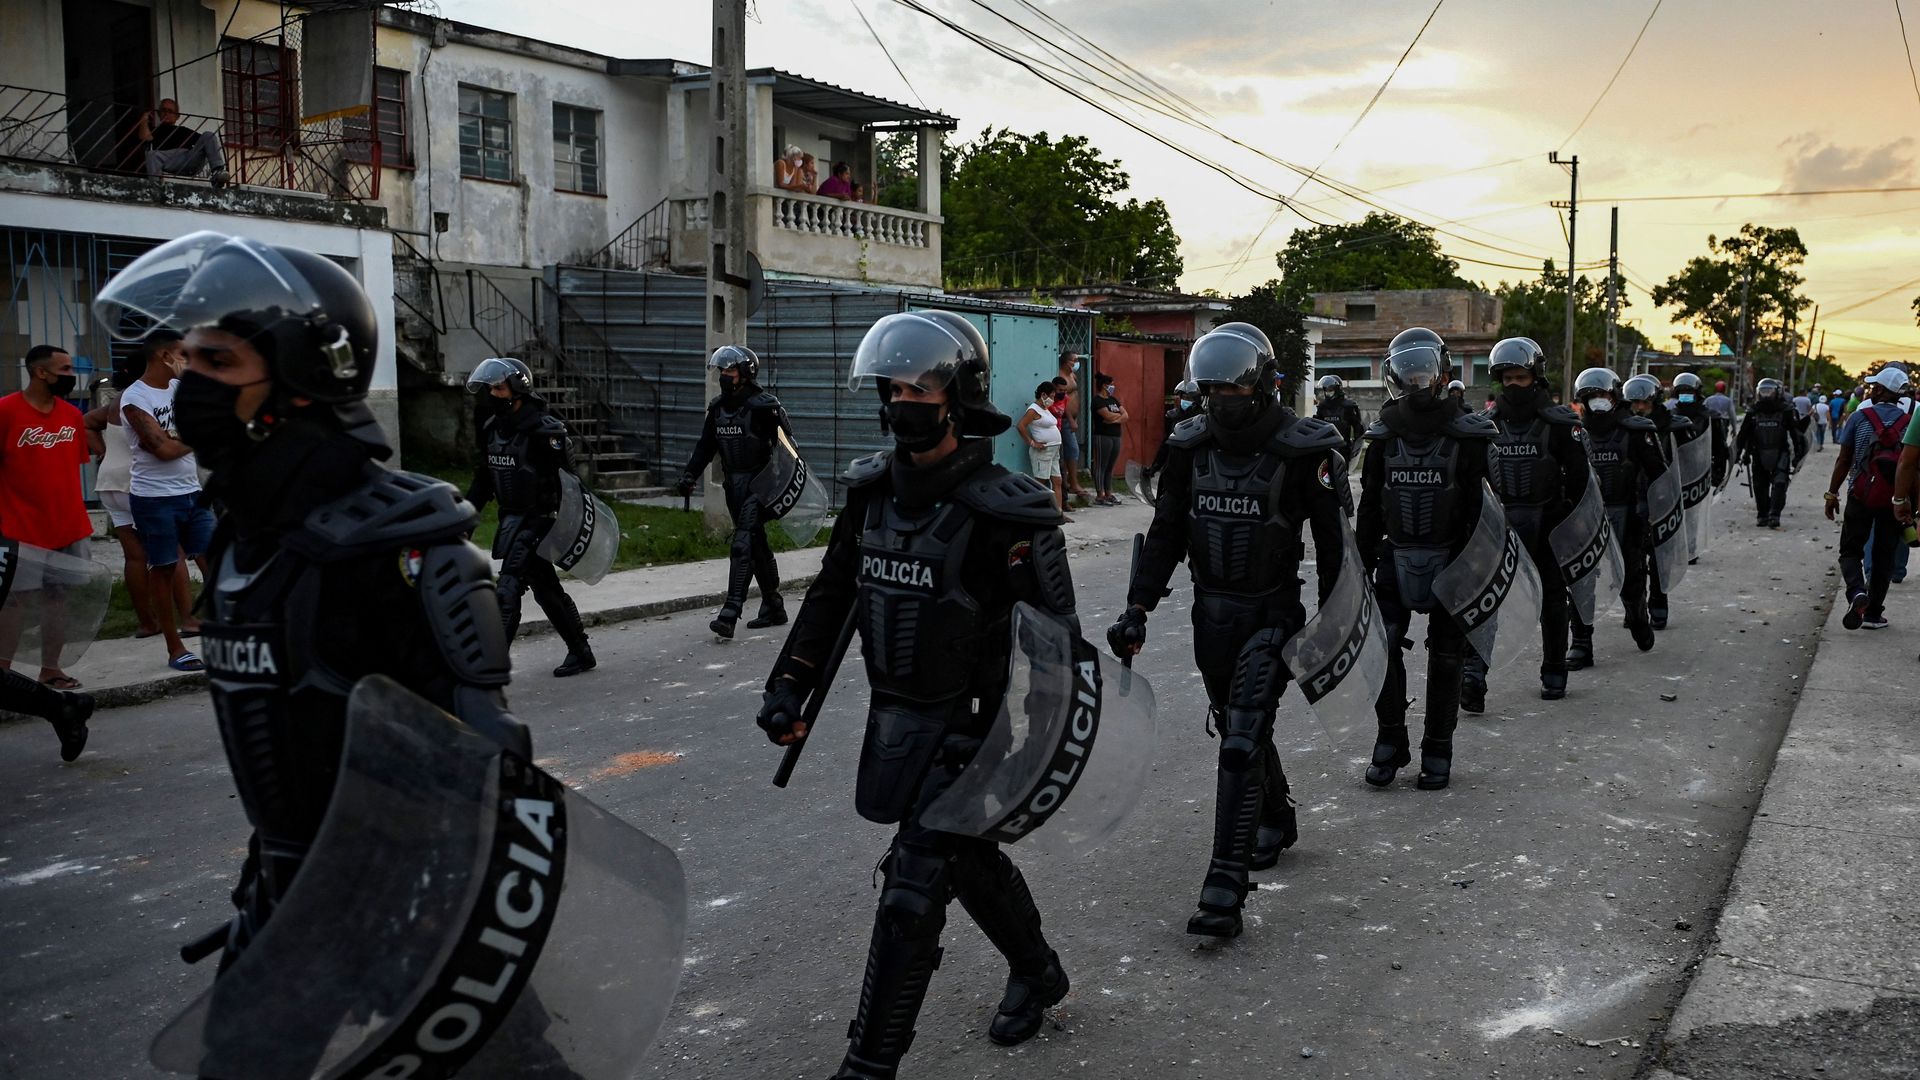 -Riot police walk the streets after a demonstration against the government of President Miguel Diaz-Canel in Arroyo Naranjo Municipality, Havana on July 12